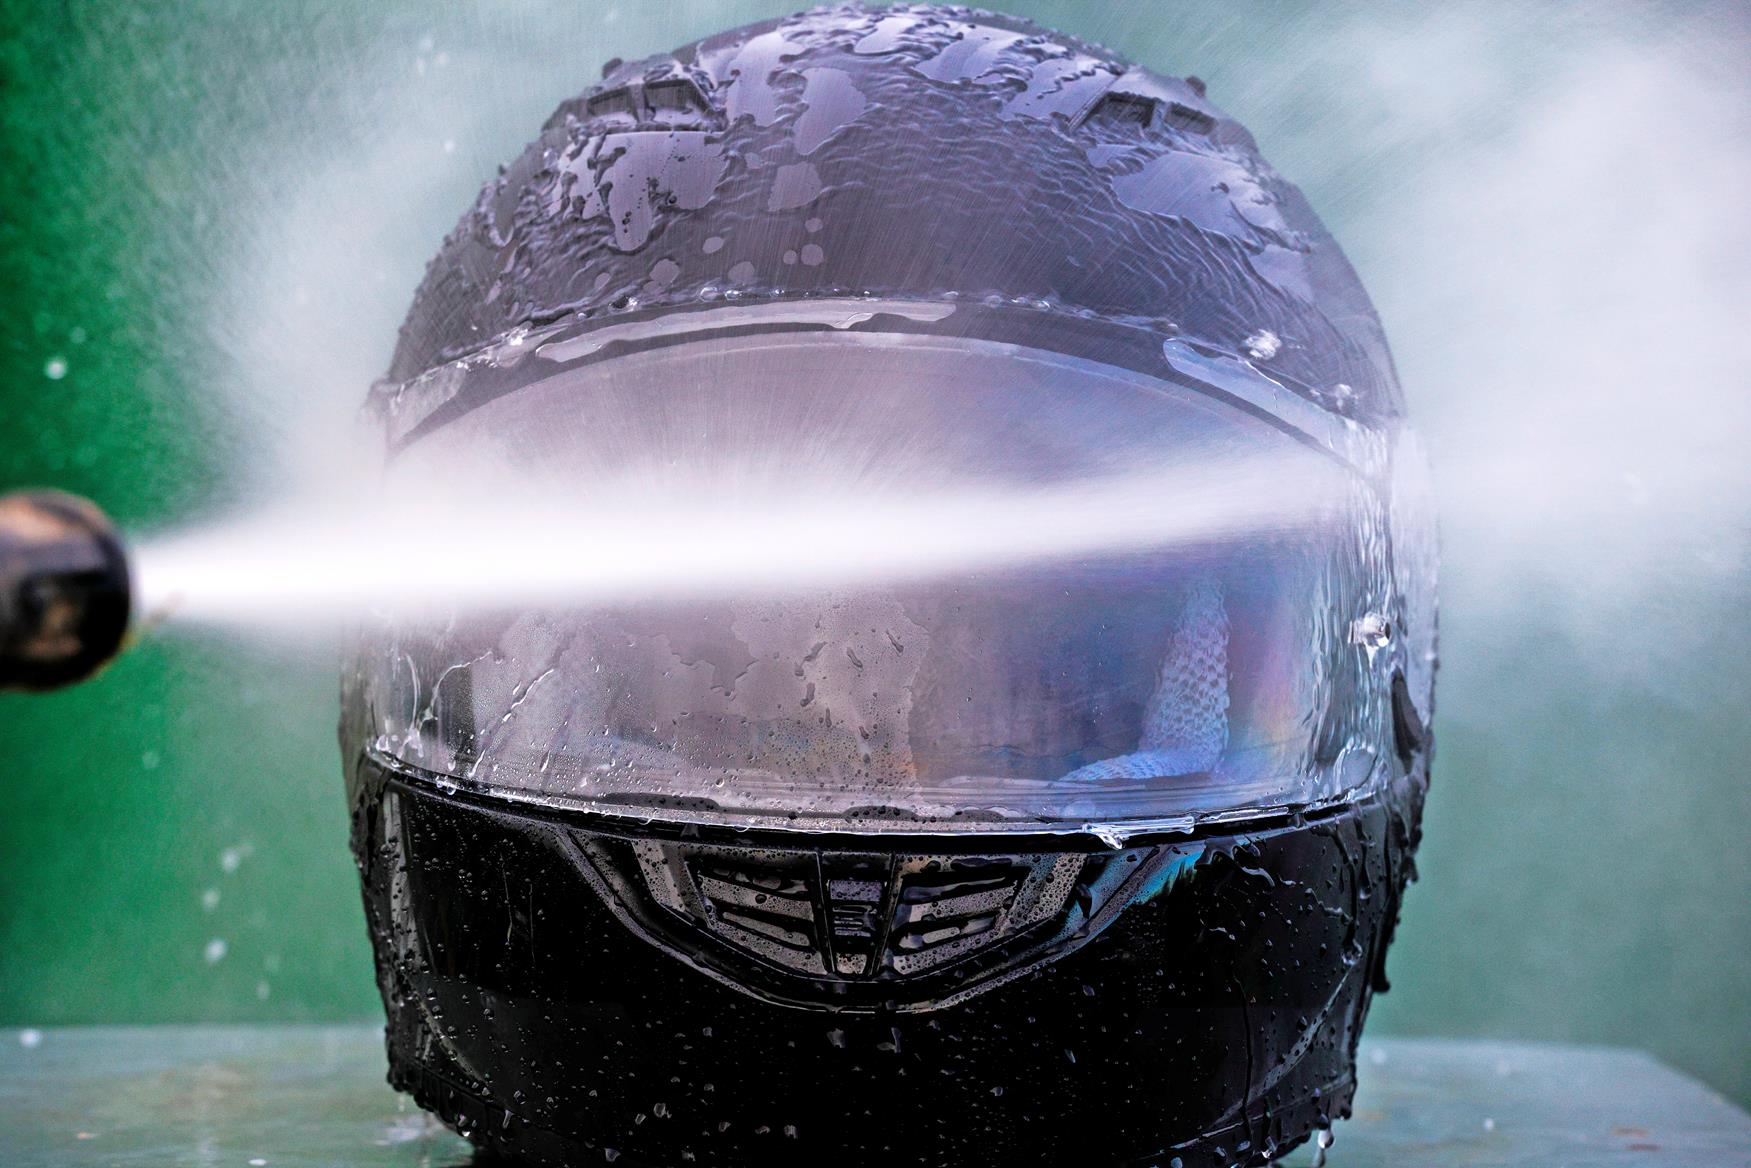 Visor being sprayed with water